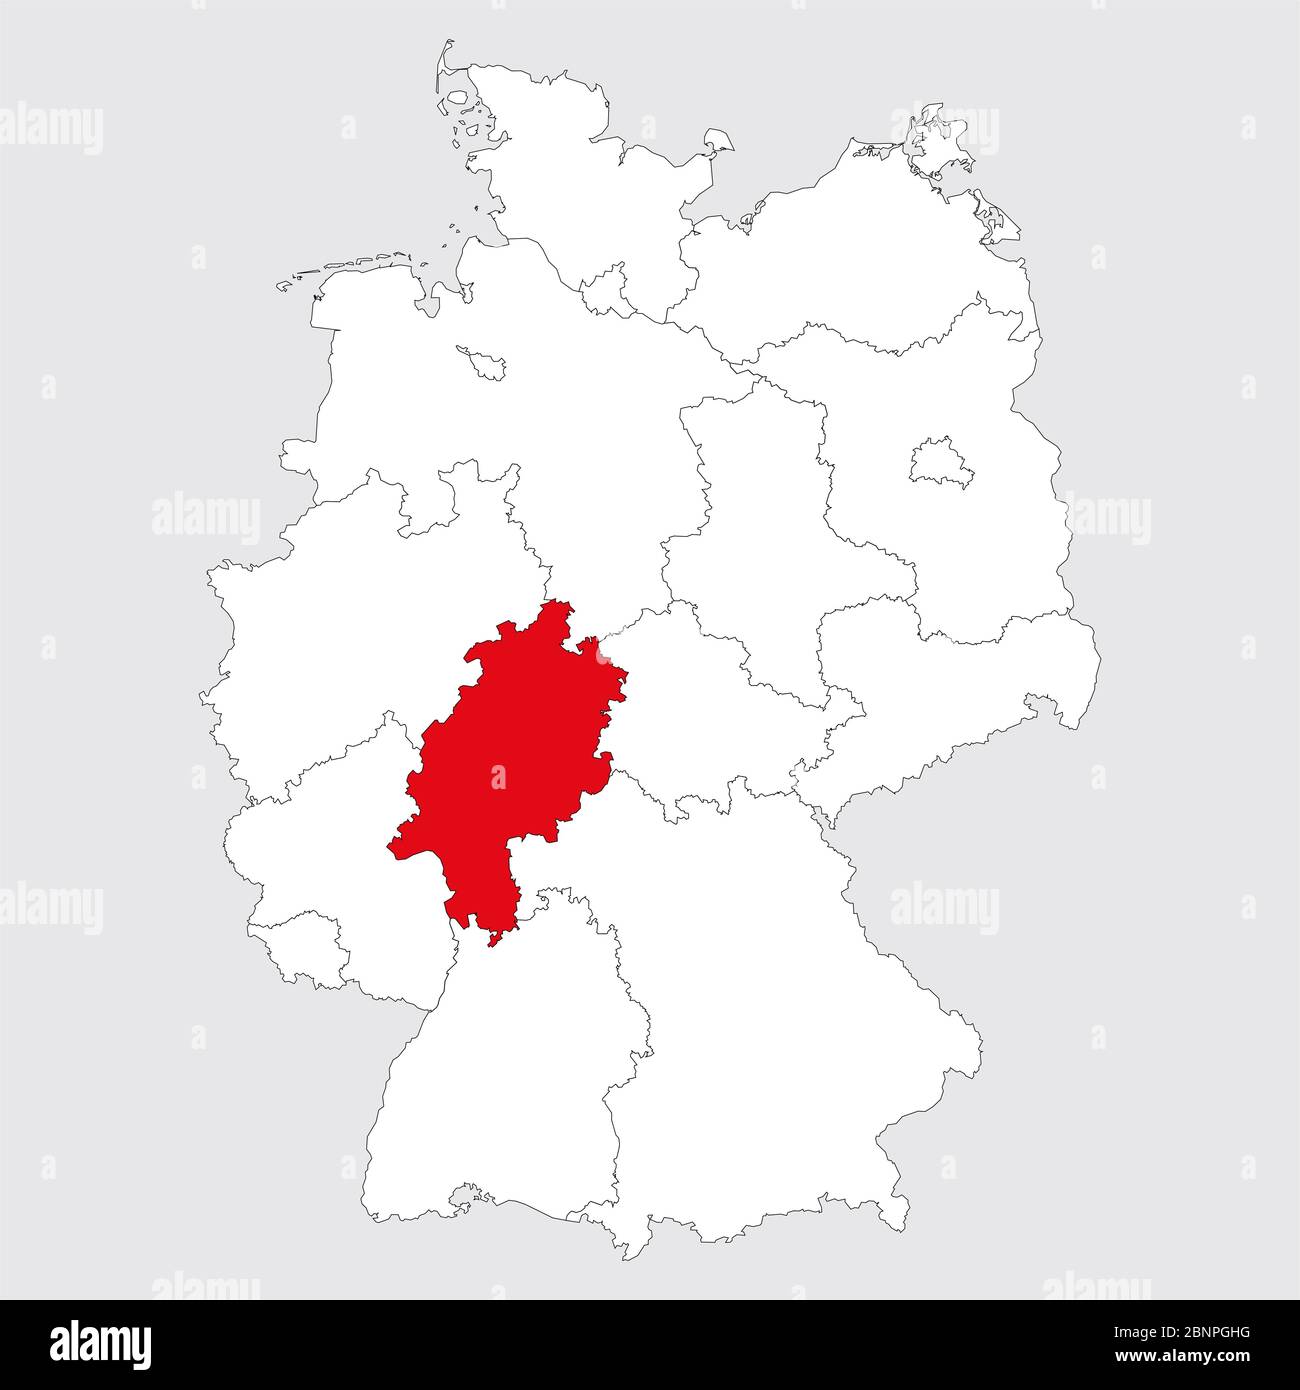 Hesse province highlighted on germany map. Gray background. German political map. Stock Vector